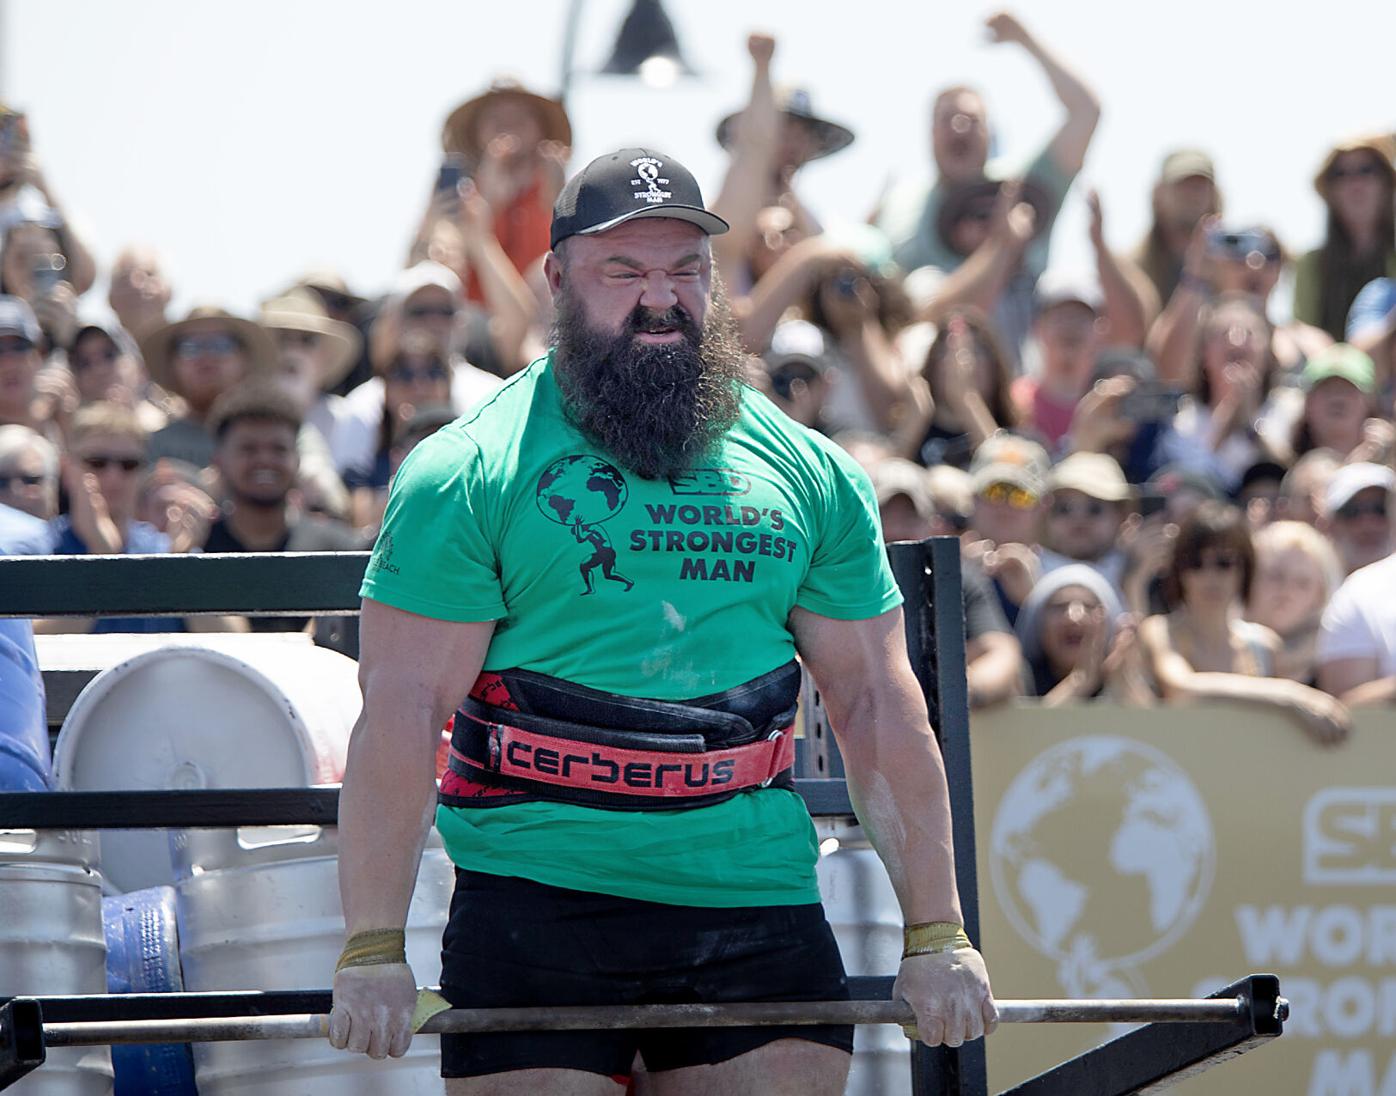 Burger Patch will cater World's Strongest Man competition - Sacramento  Business Journal